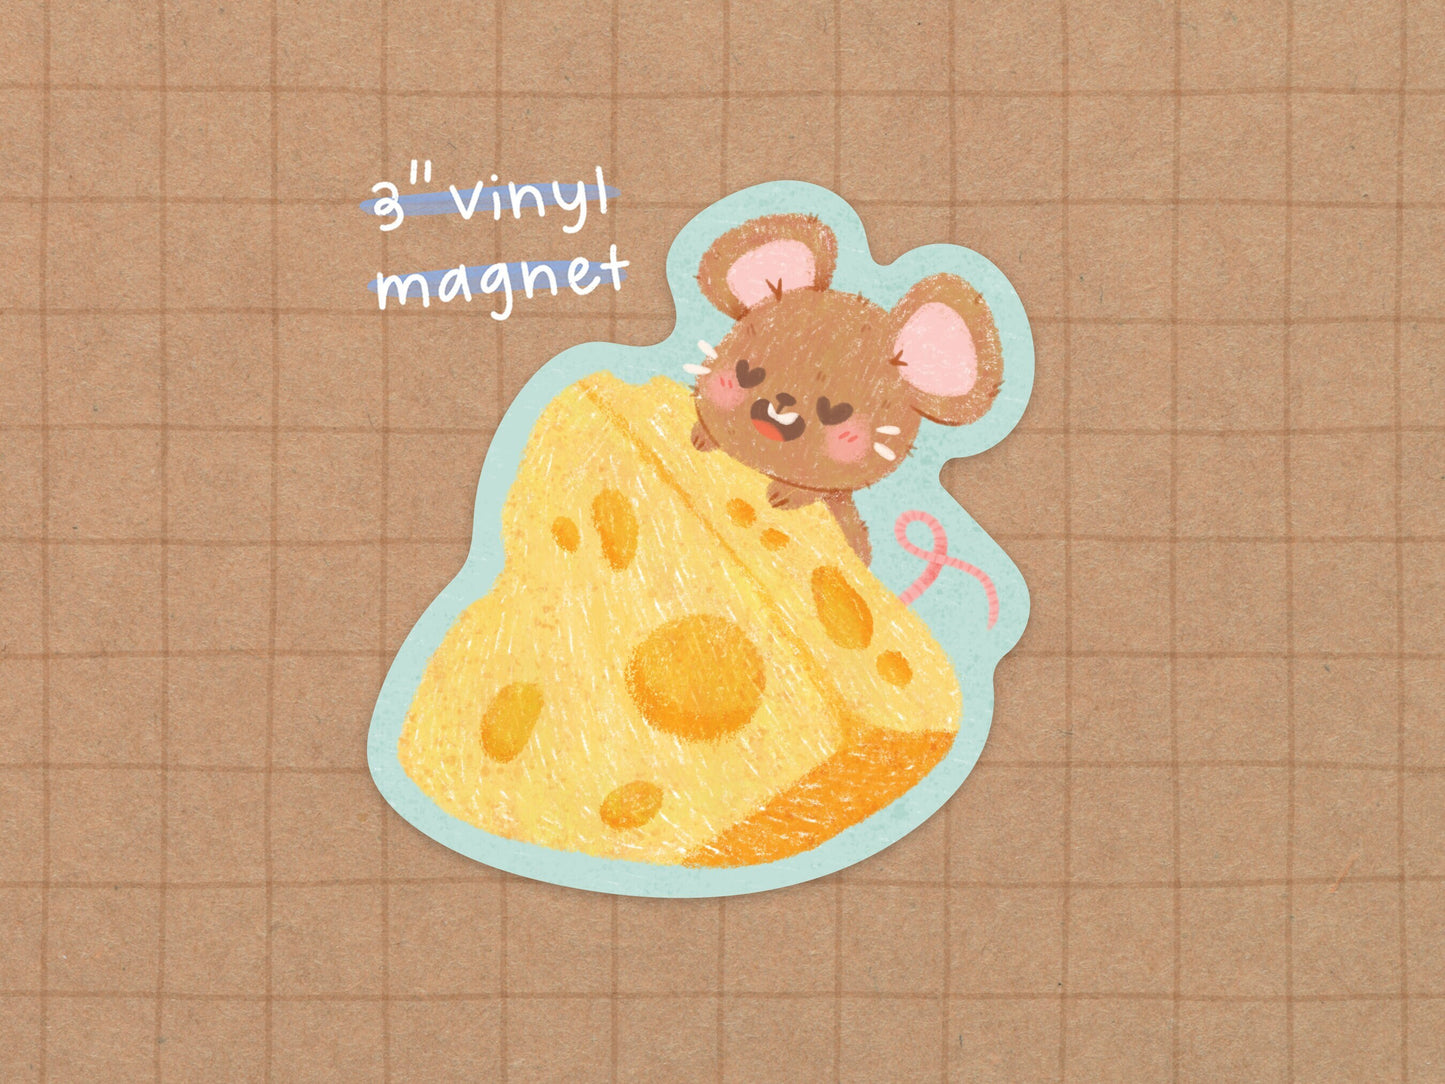 Cheese Mouse Vinyl Magnet